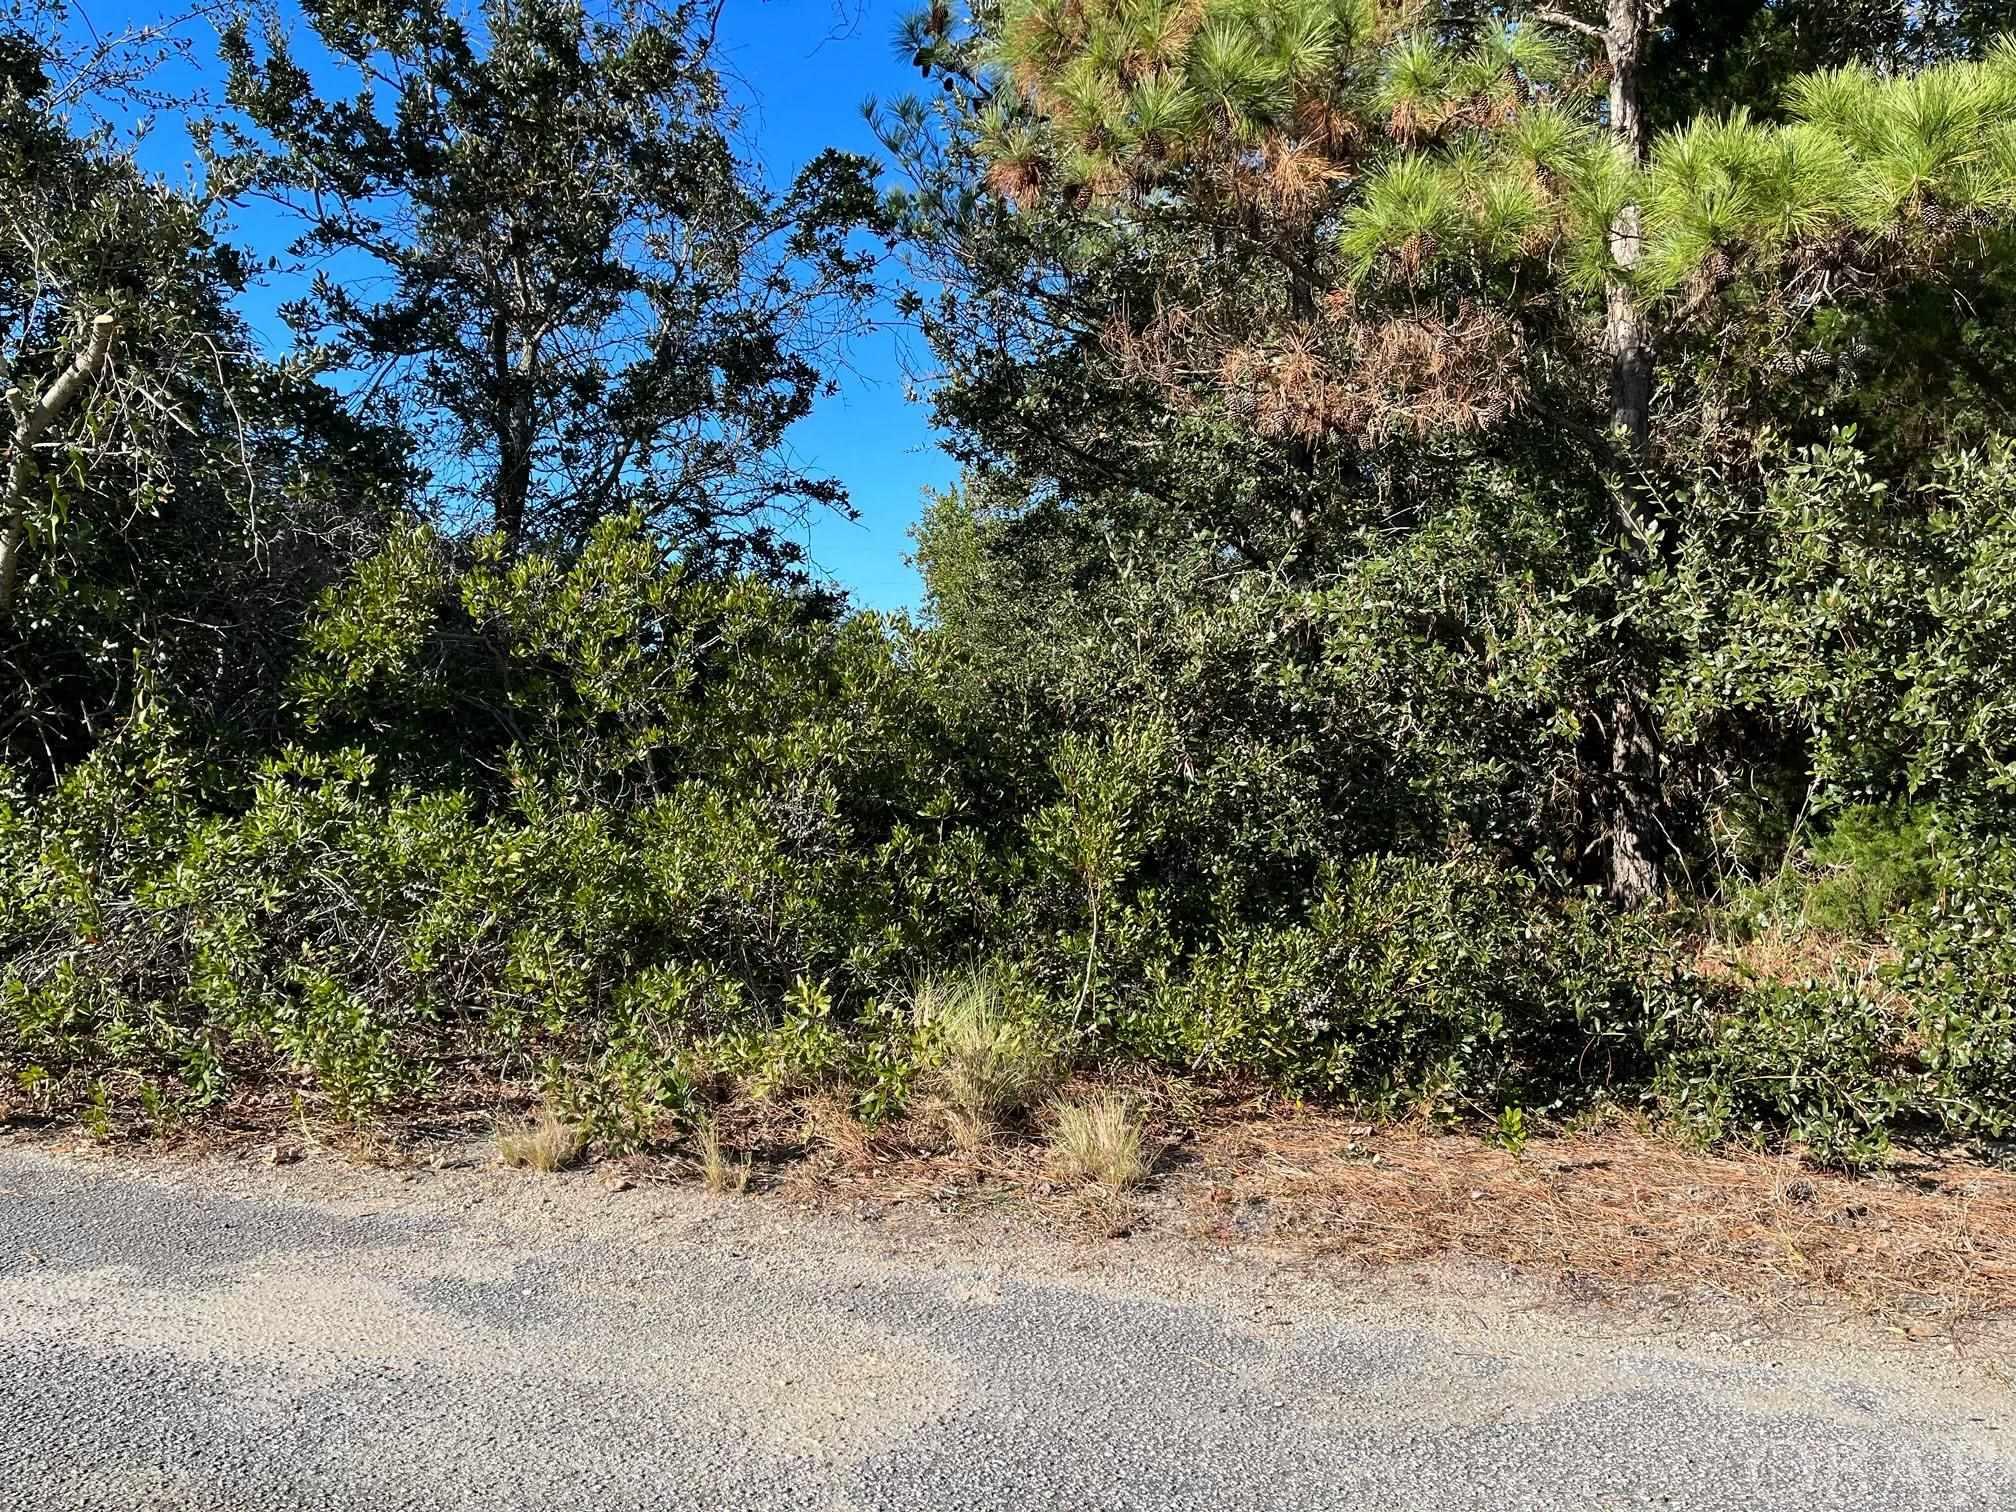 Rare opportunity to own high elevation homesite in Oak Run. Elevations on property run between 15-20 ft. above sea level...flood zone ''X' (per survey). Possible ocean views with two story home looking NE. Plenty of room to stretch out in his wide 15,000 sq. ft. property.